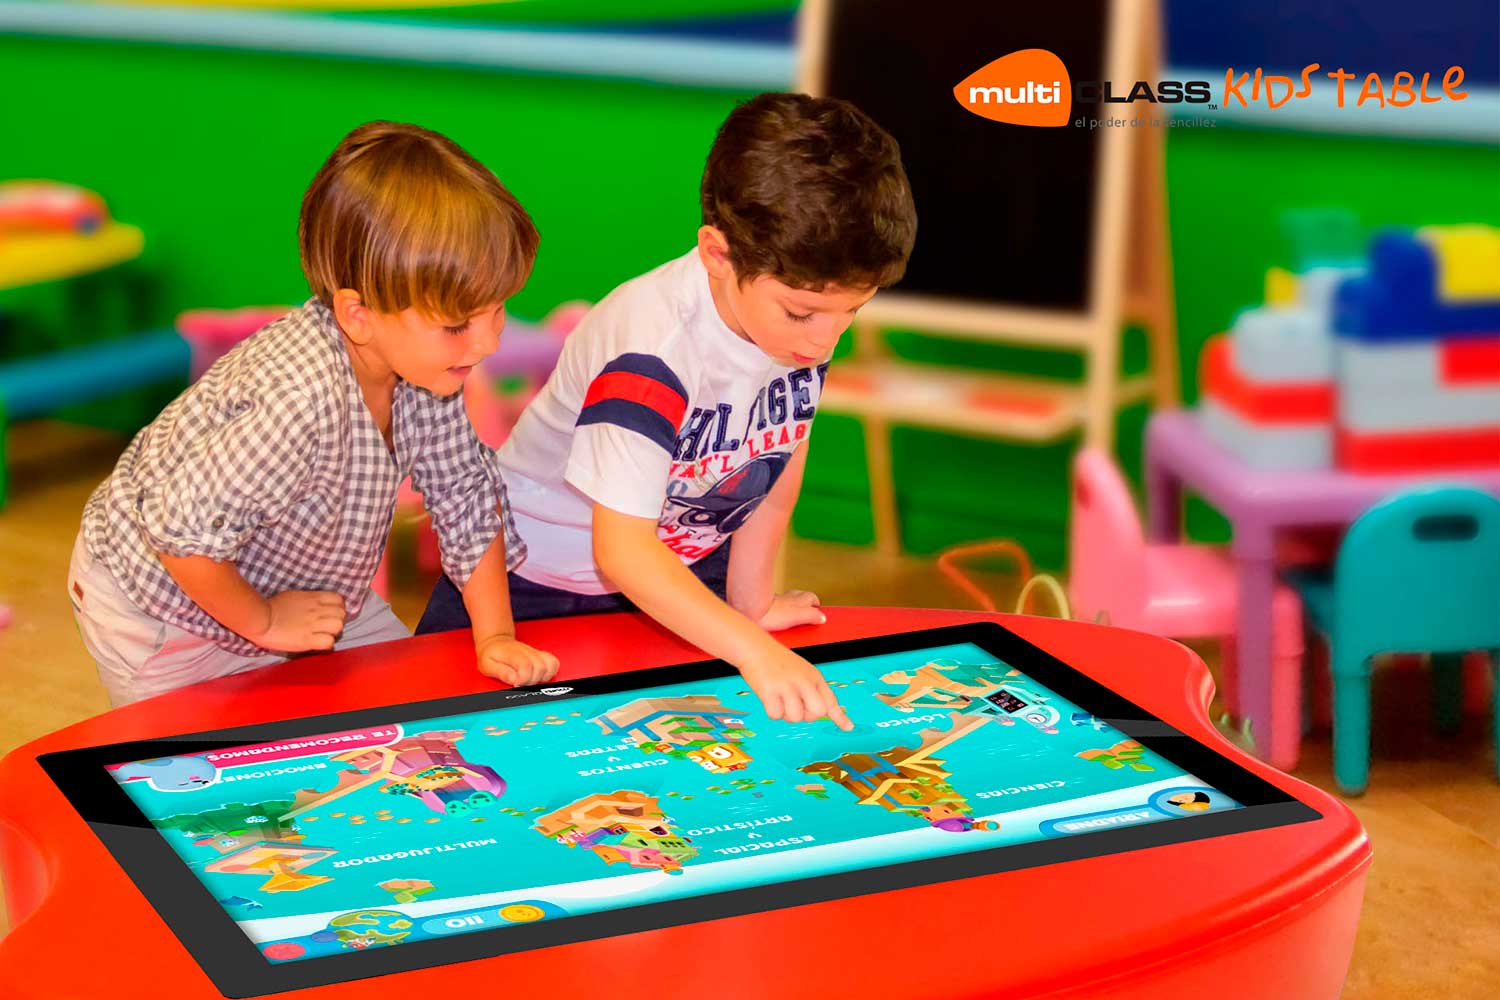 Touchscreen table multiCLASS Kids Table education